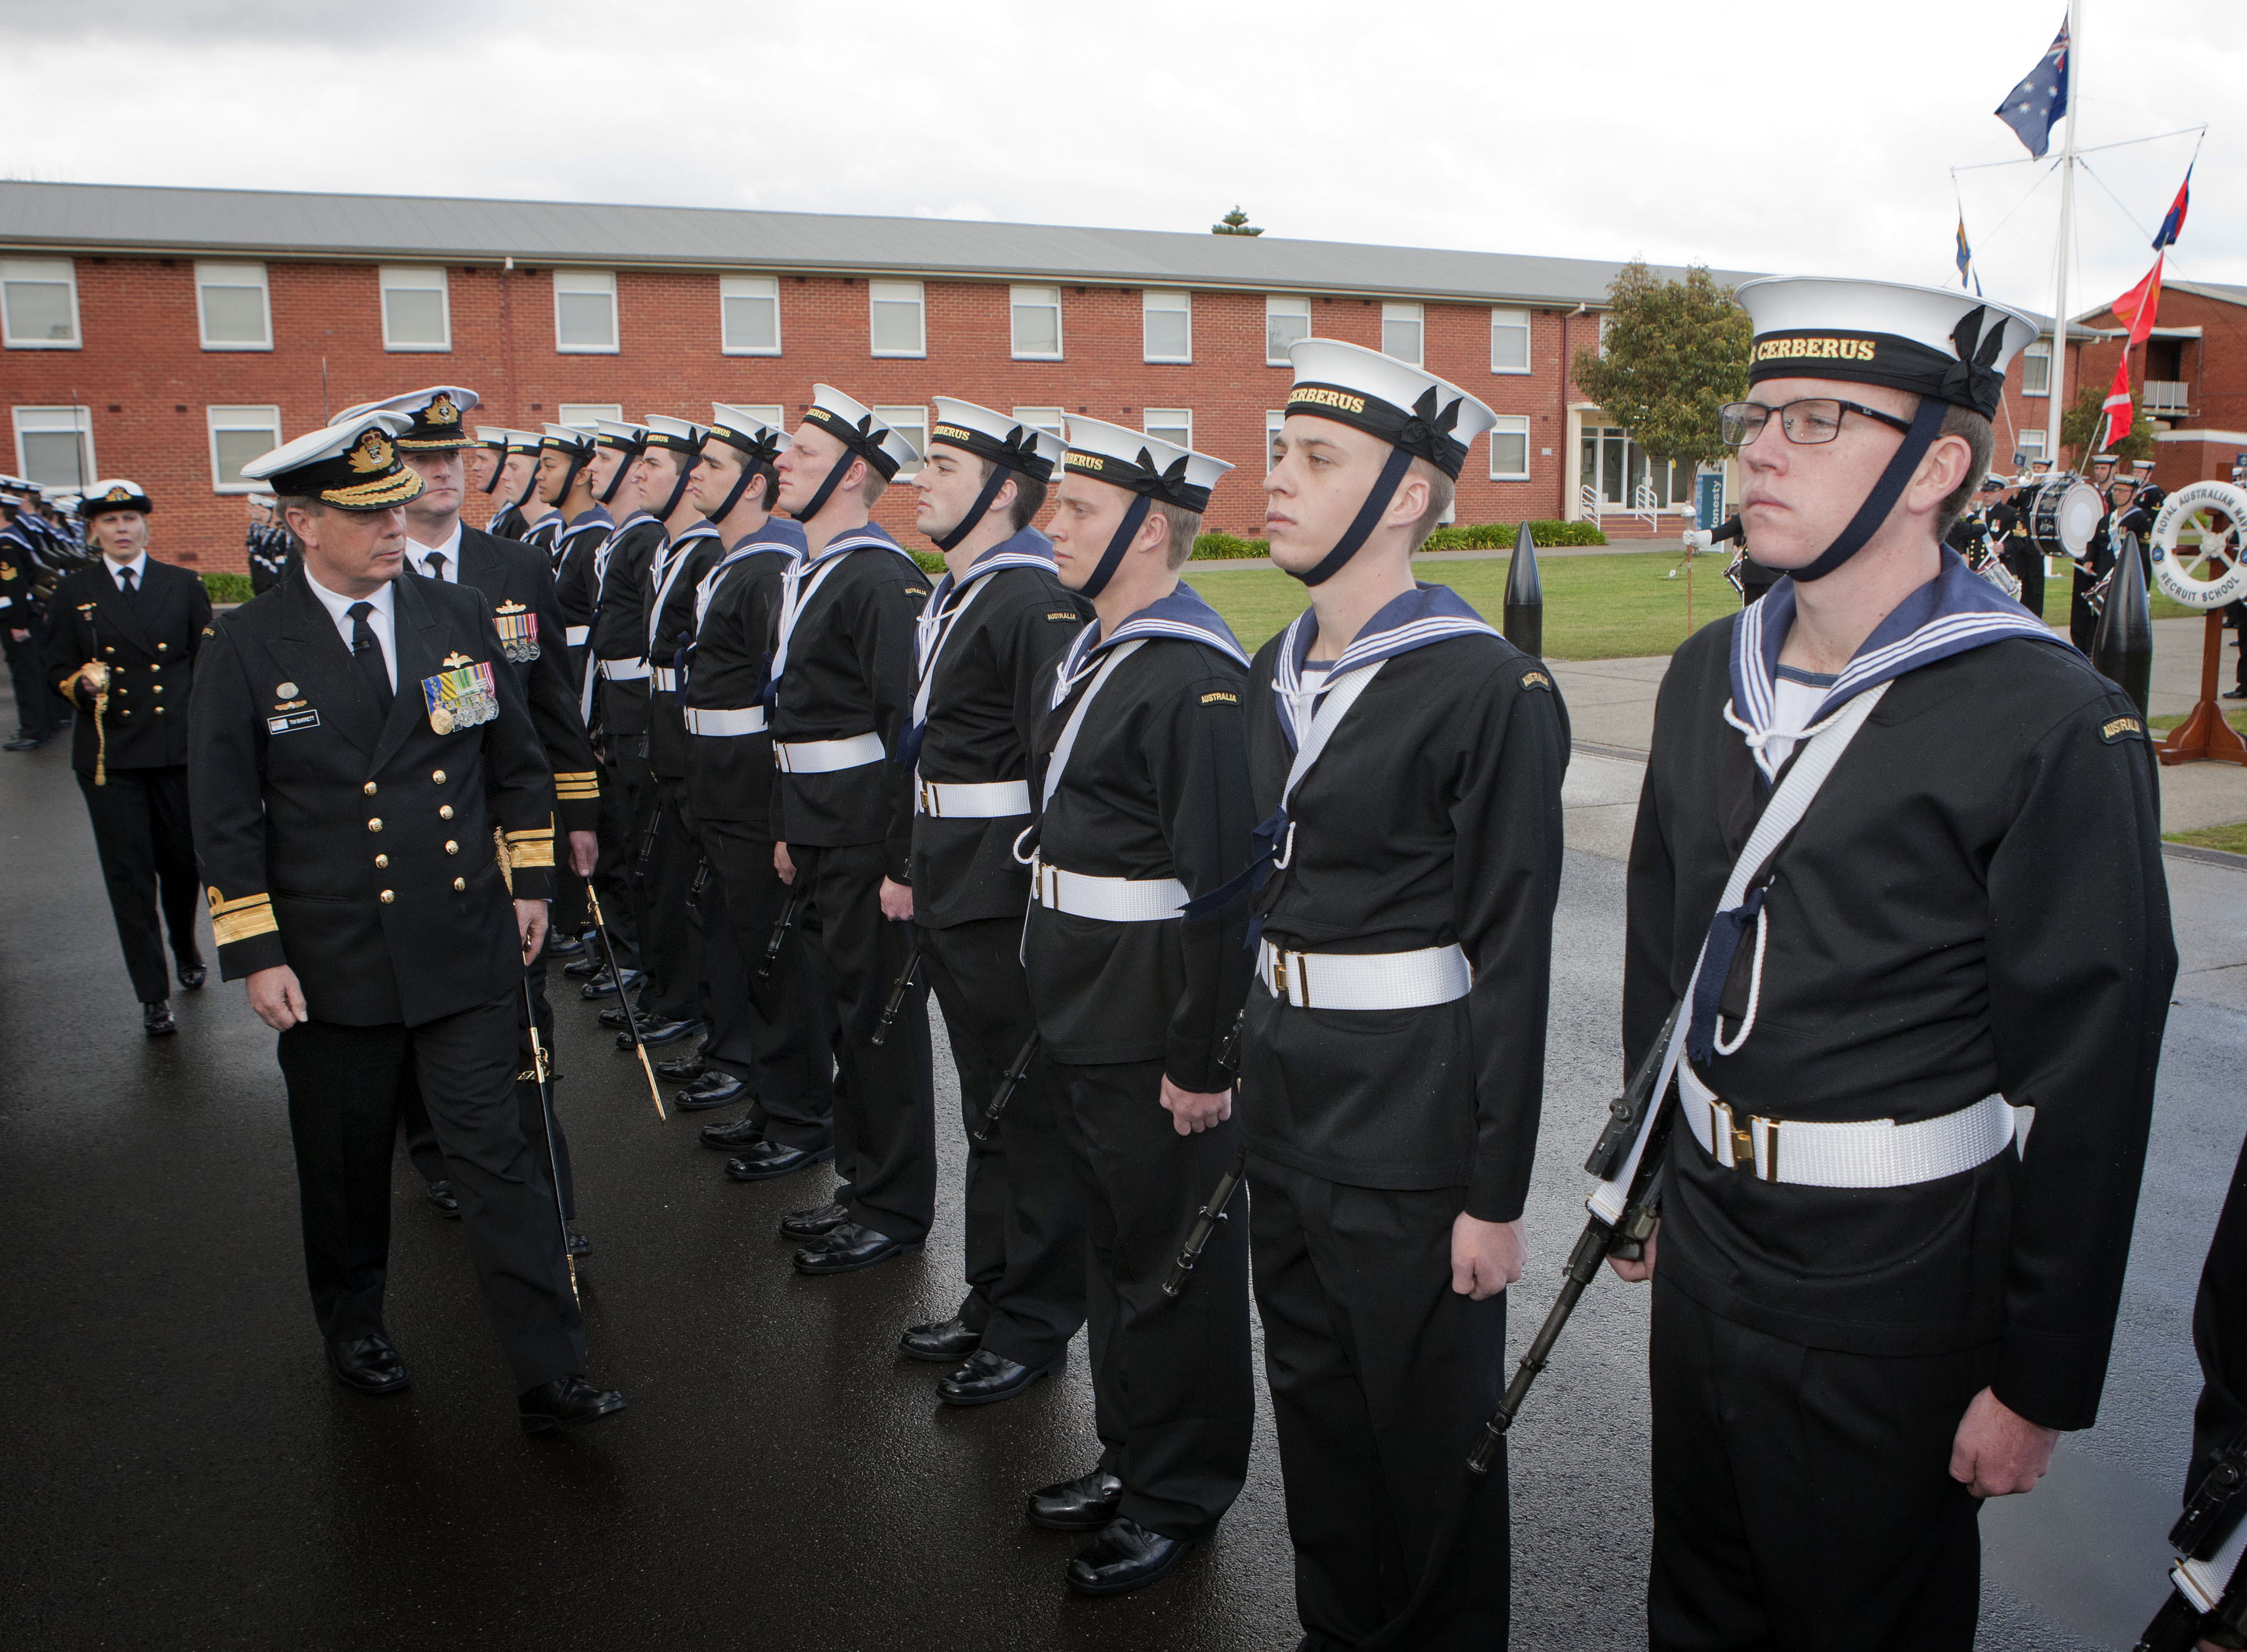 royal navy enlisted uniforms